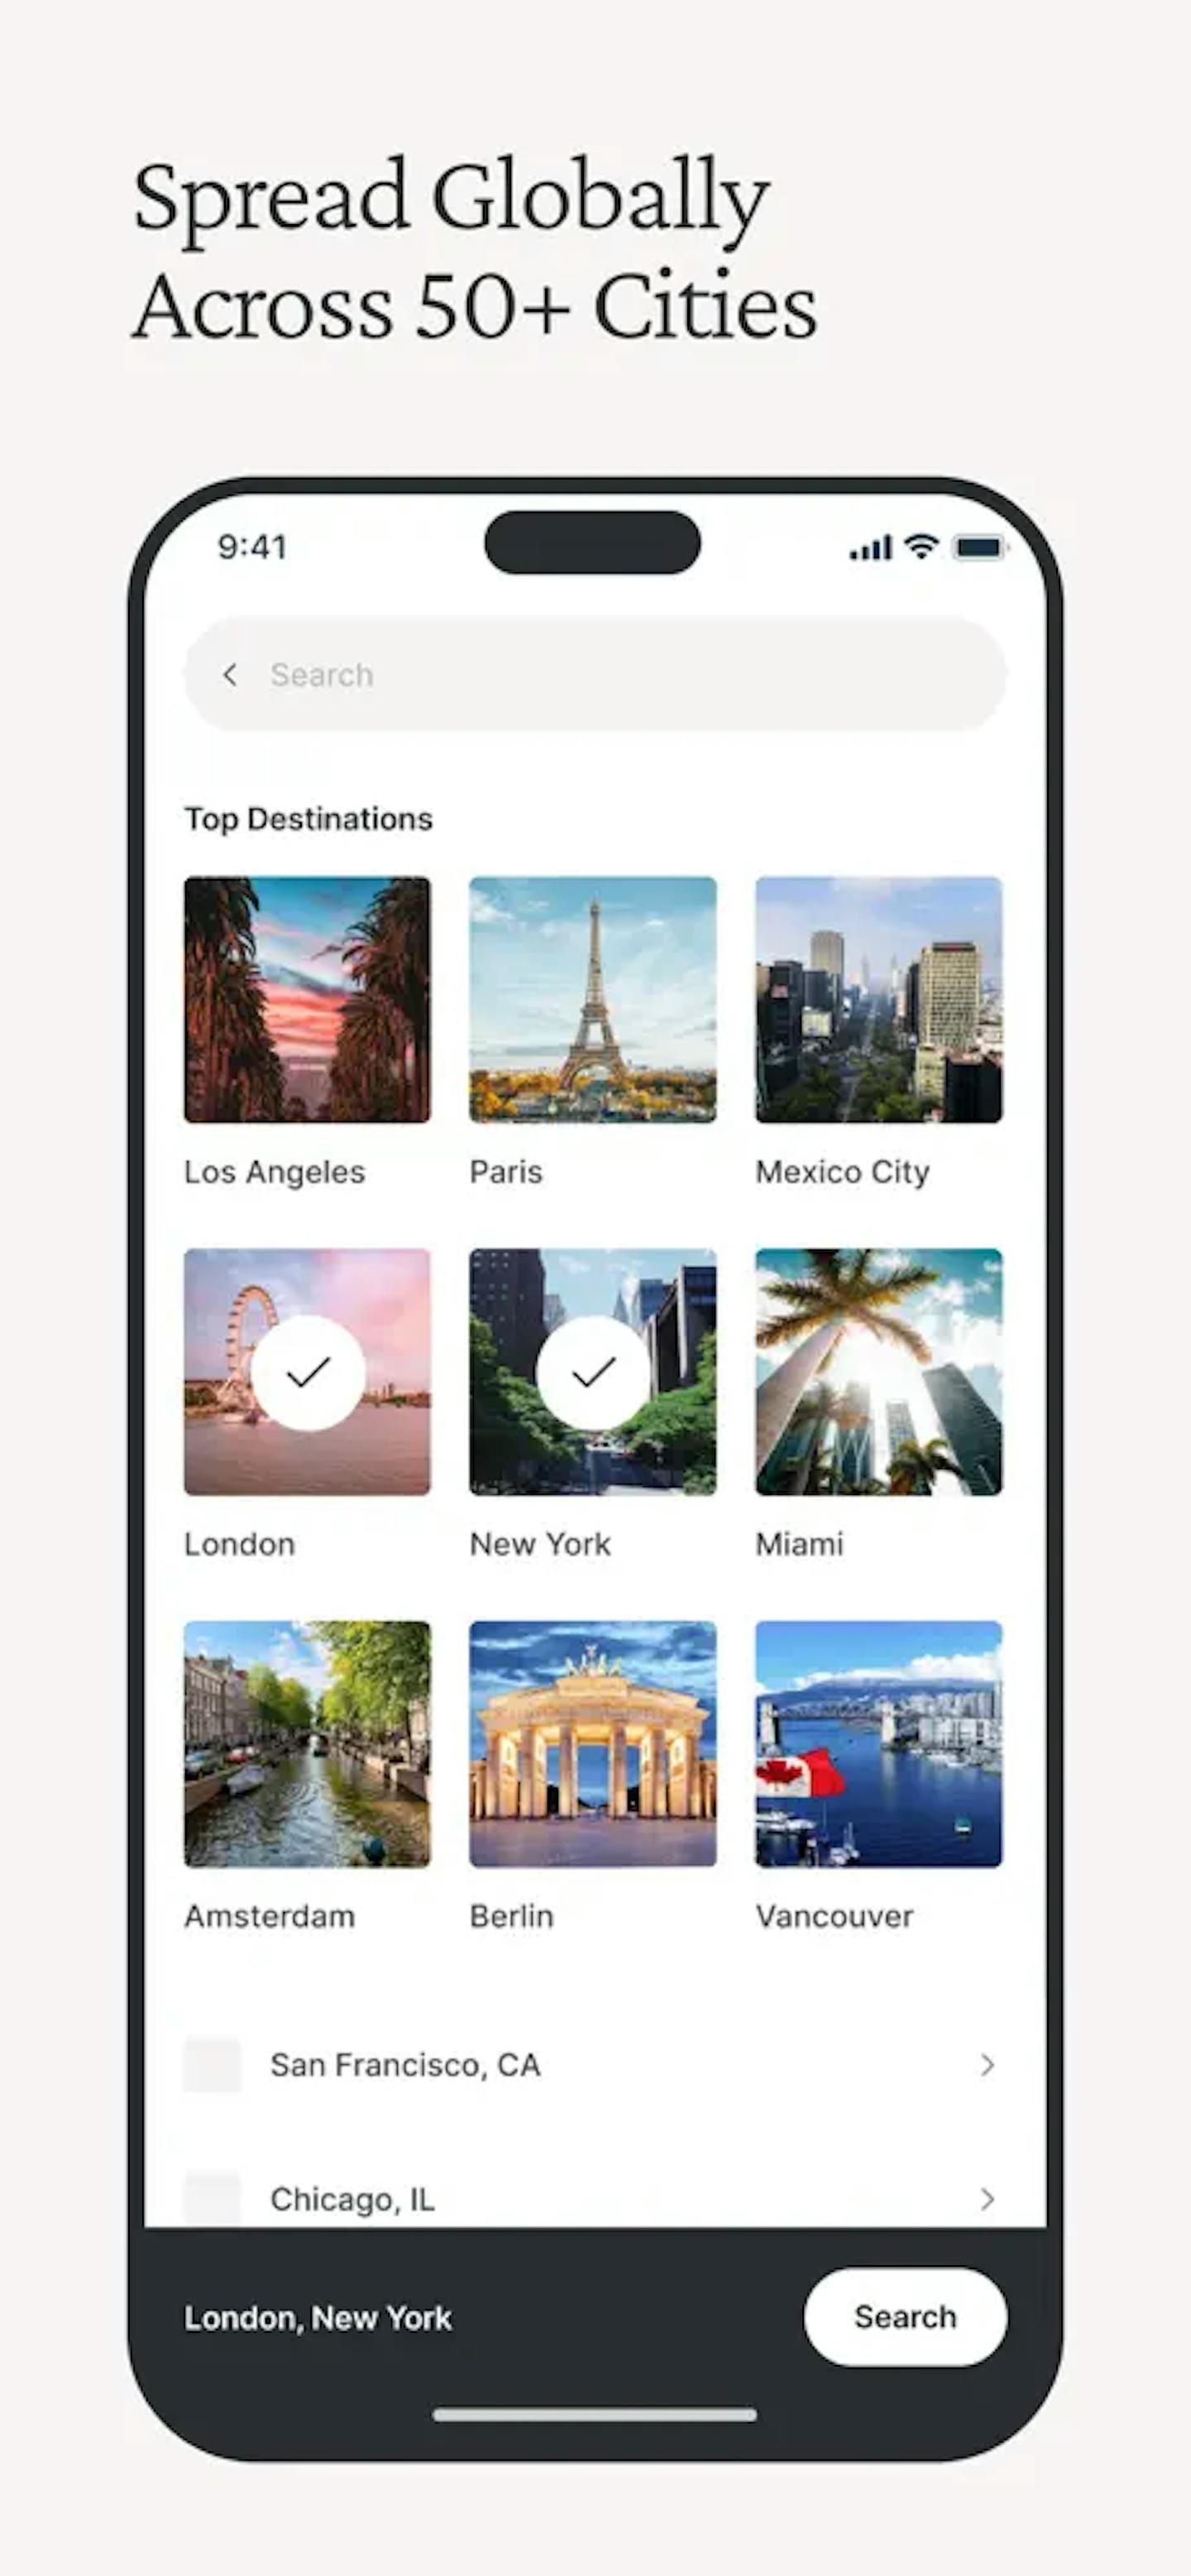 Explore over 50+ cities with Kindred - A visual selection of top travel destinations including iconic landmarks from Los Angeles to Paris, available for home swapping on the app.